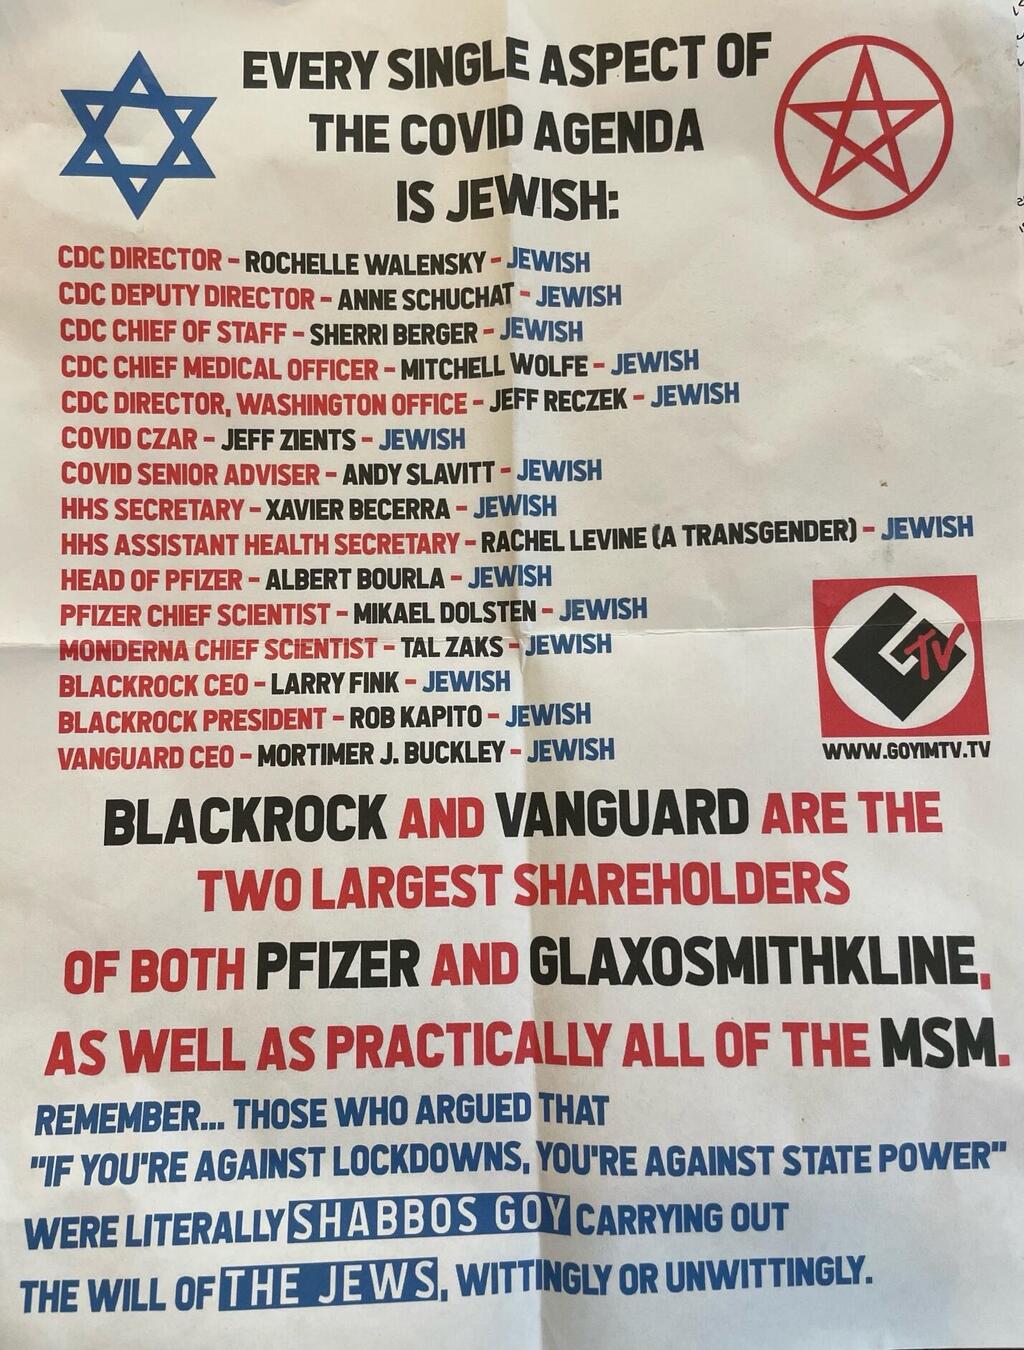 The antisemitic flyer Charles Kaufman received, blaming Jews for the new surge of COVID-19 